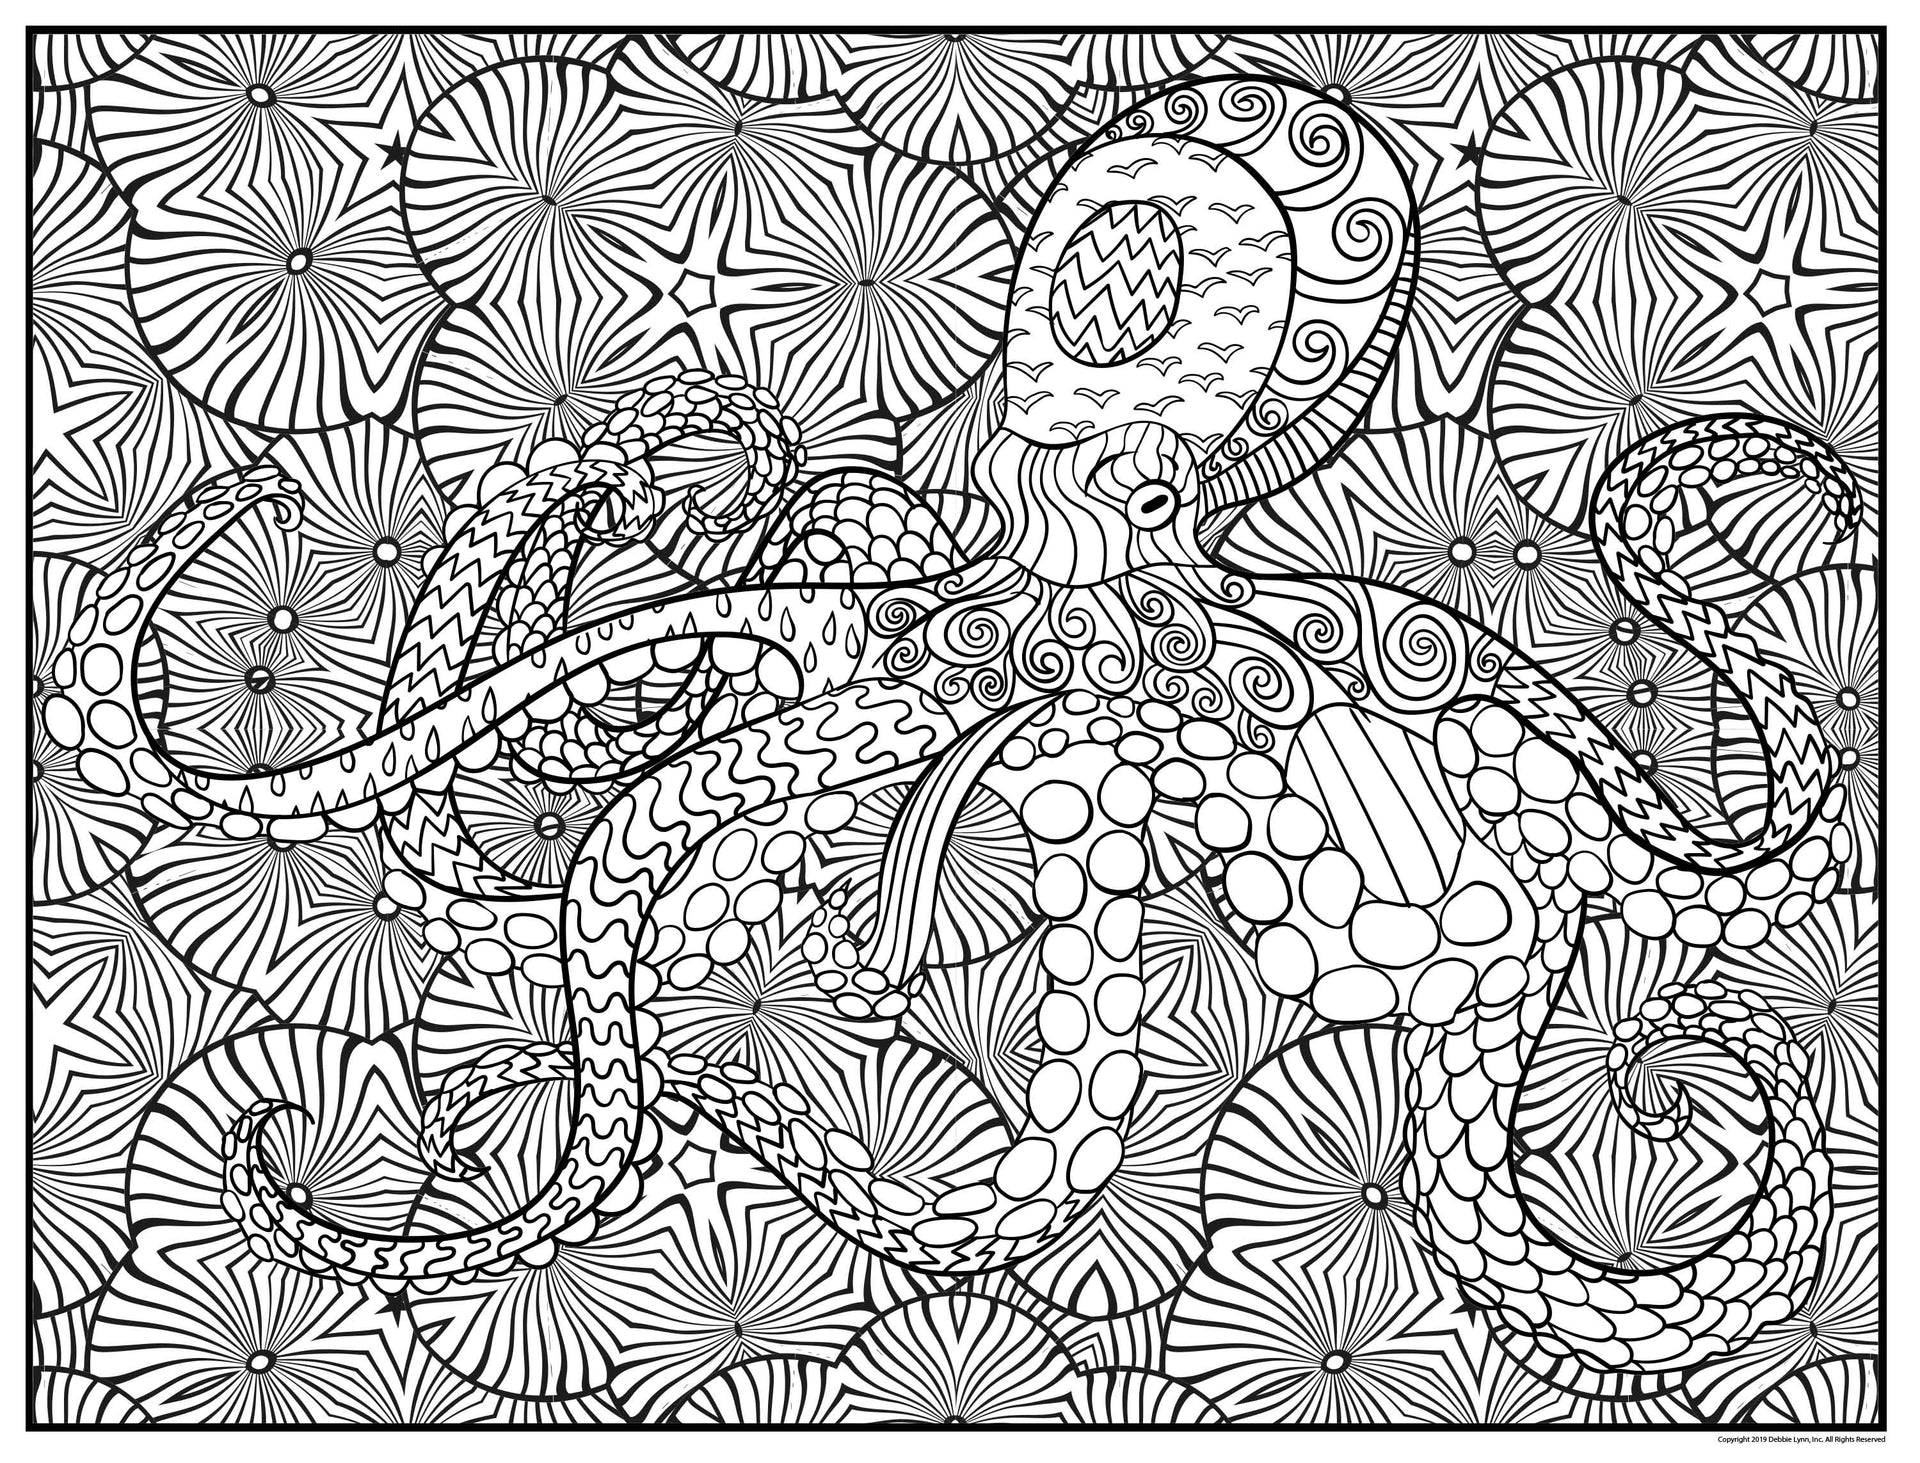 Underwater World Giant Coloring Poster - 24 x 36 Inch